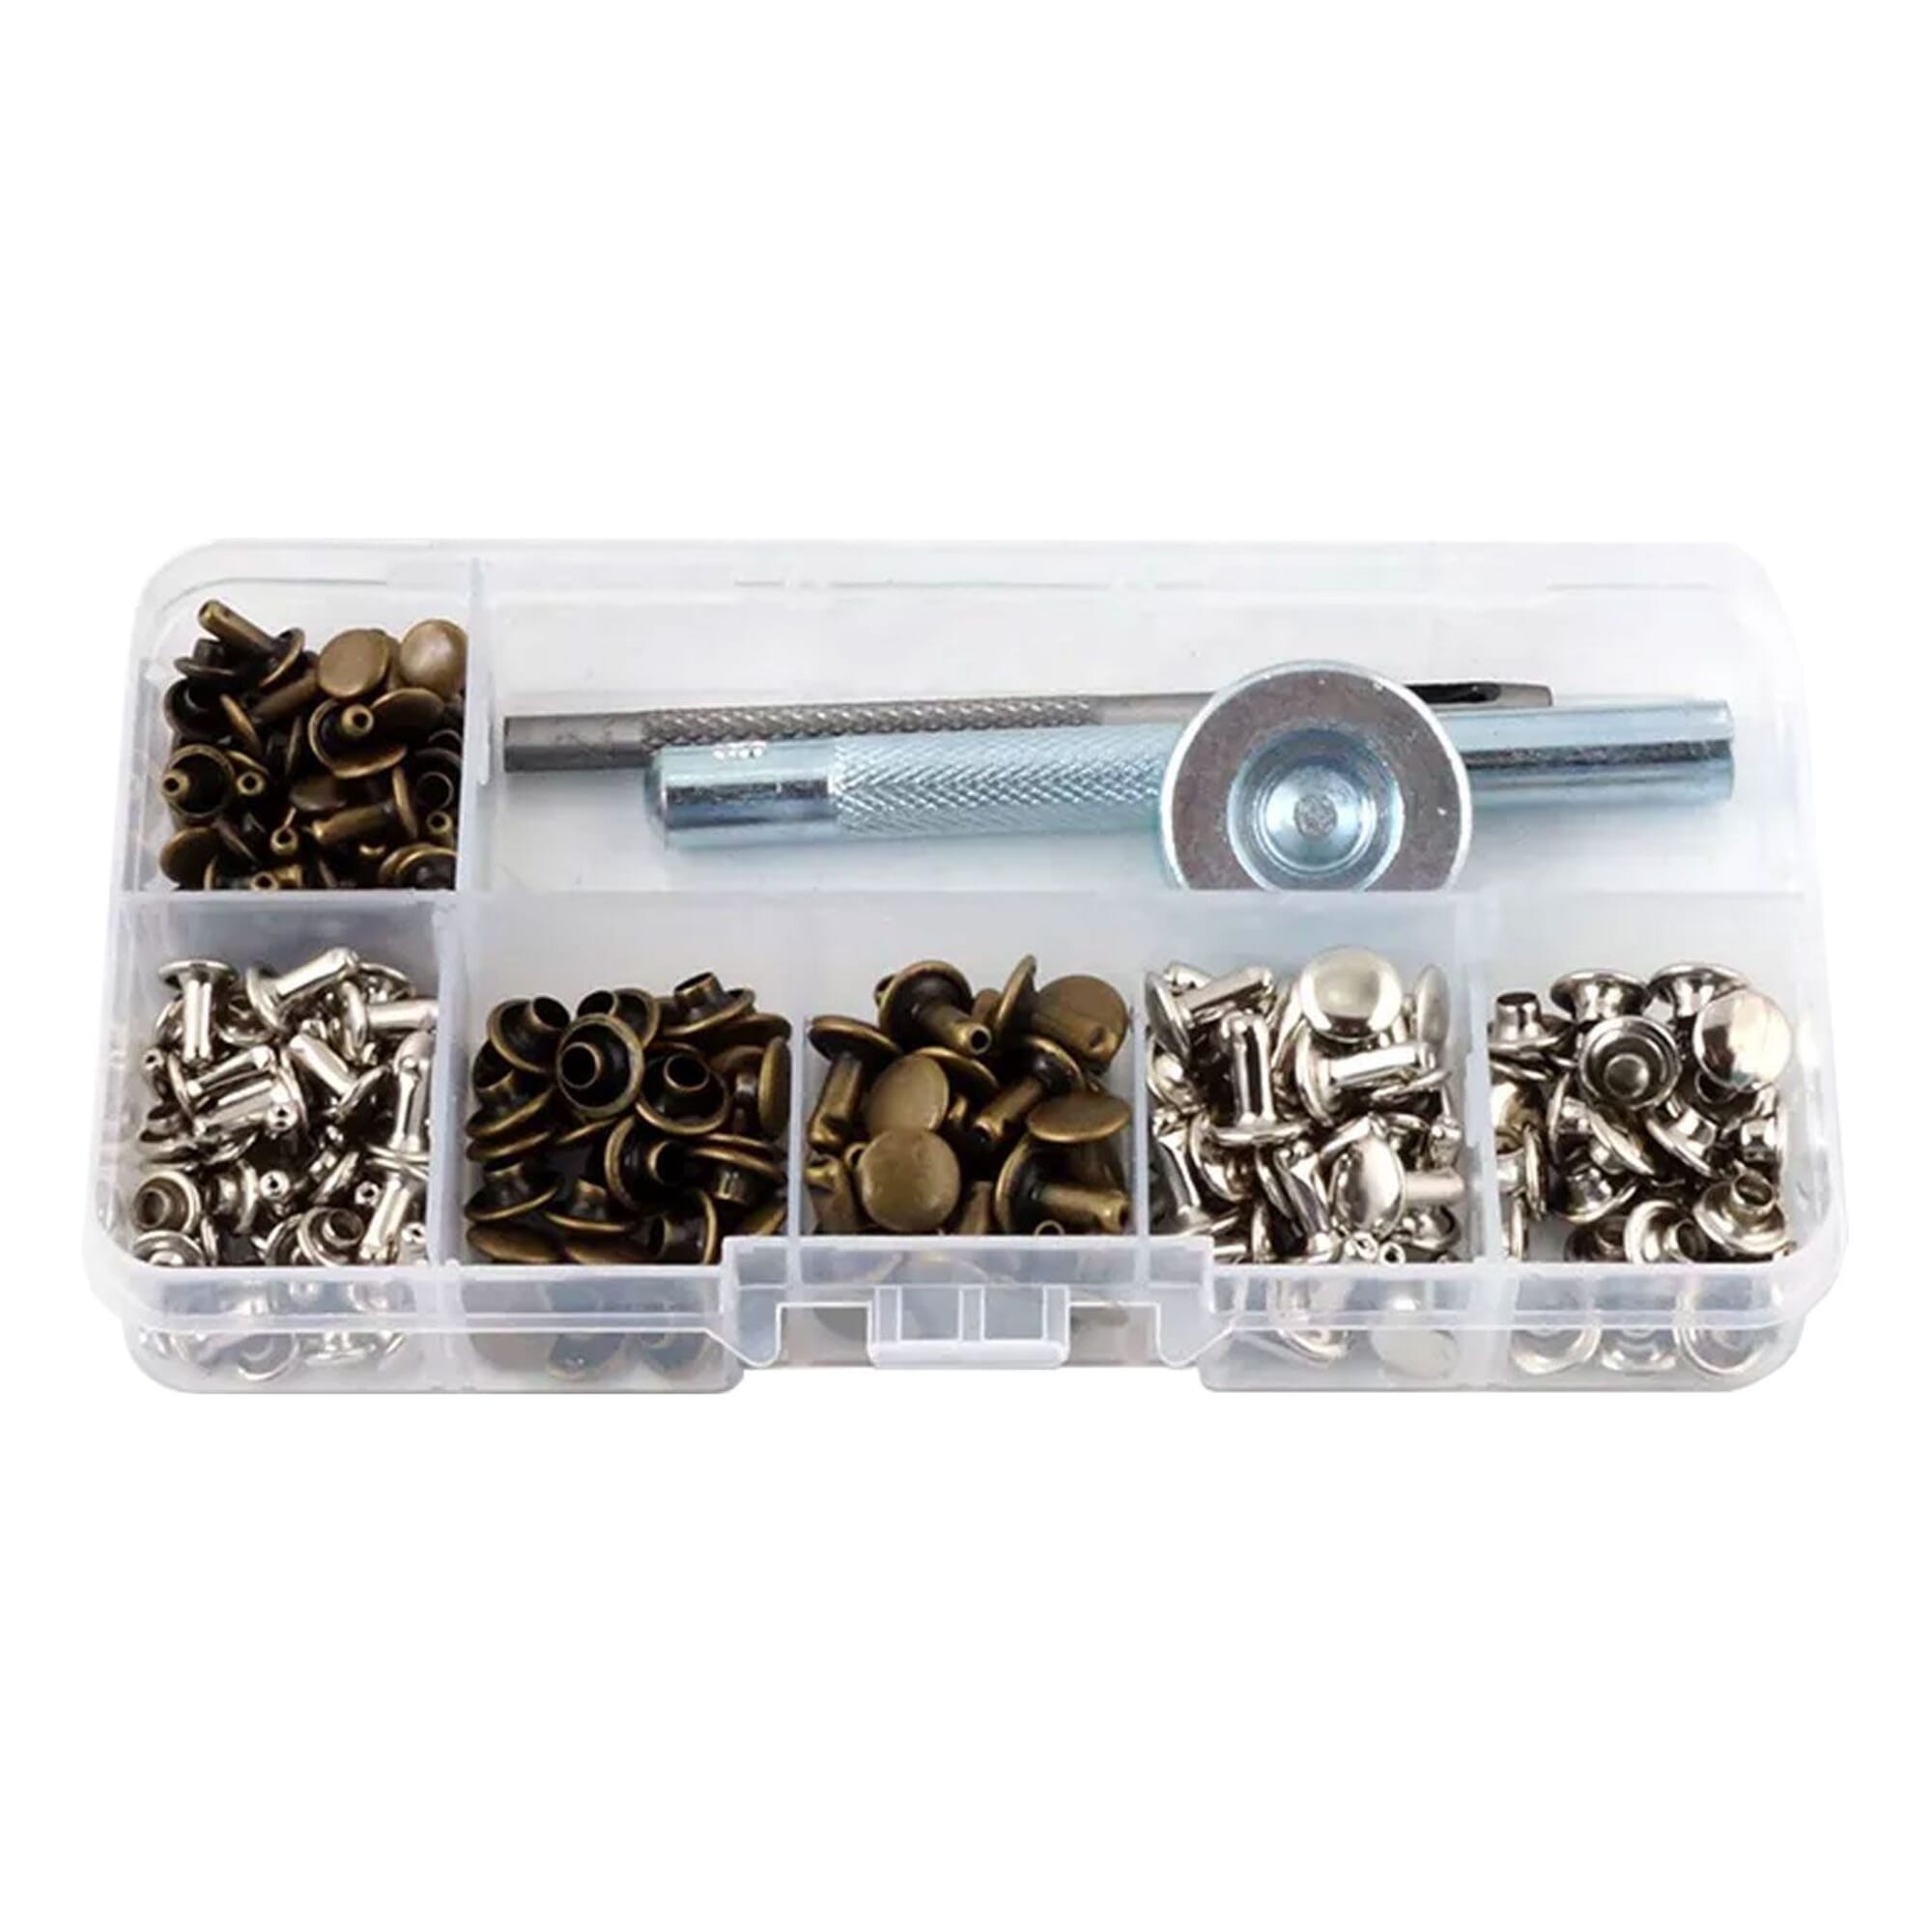 2 Boxes 30 Sets/Box Snap Fasteners Kit with 4 Setter Tools & Storage Box